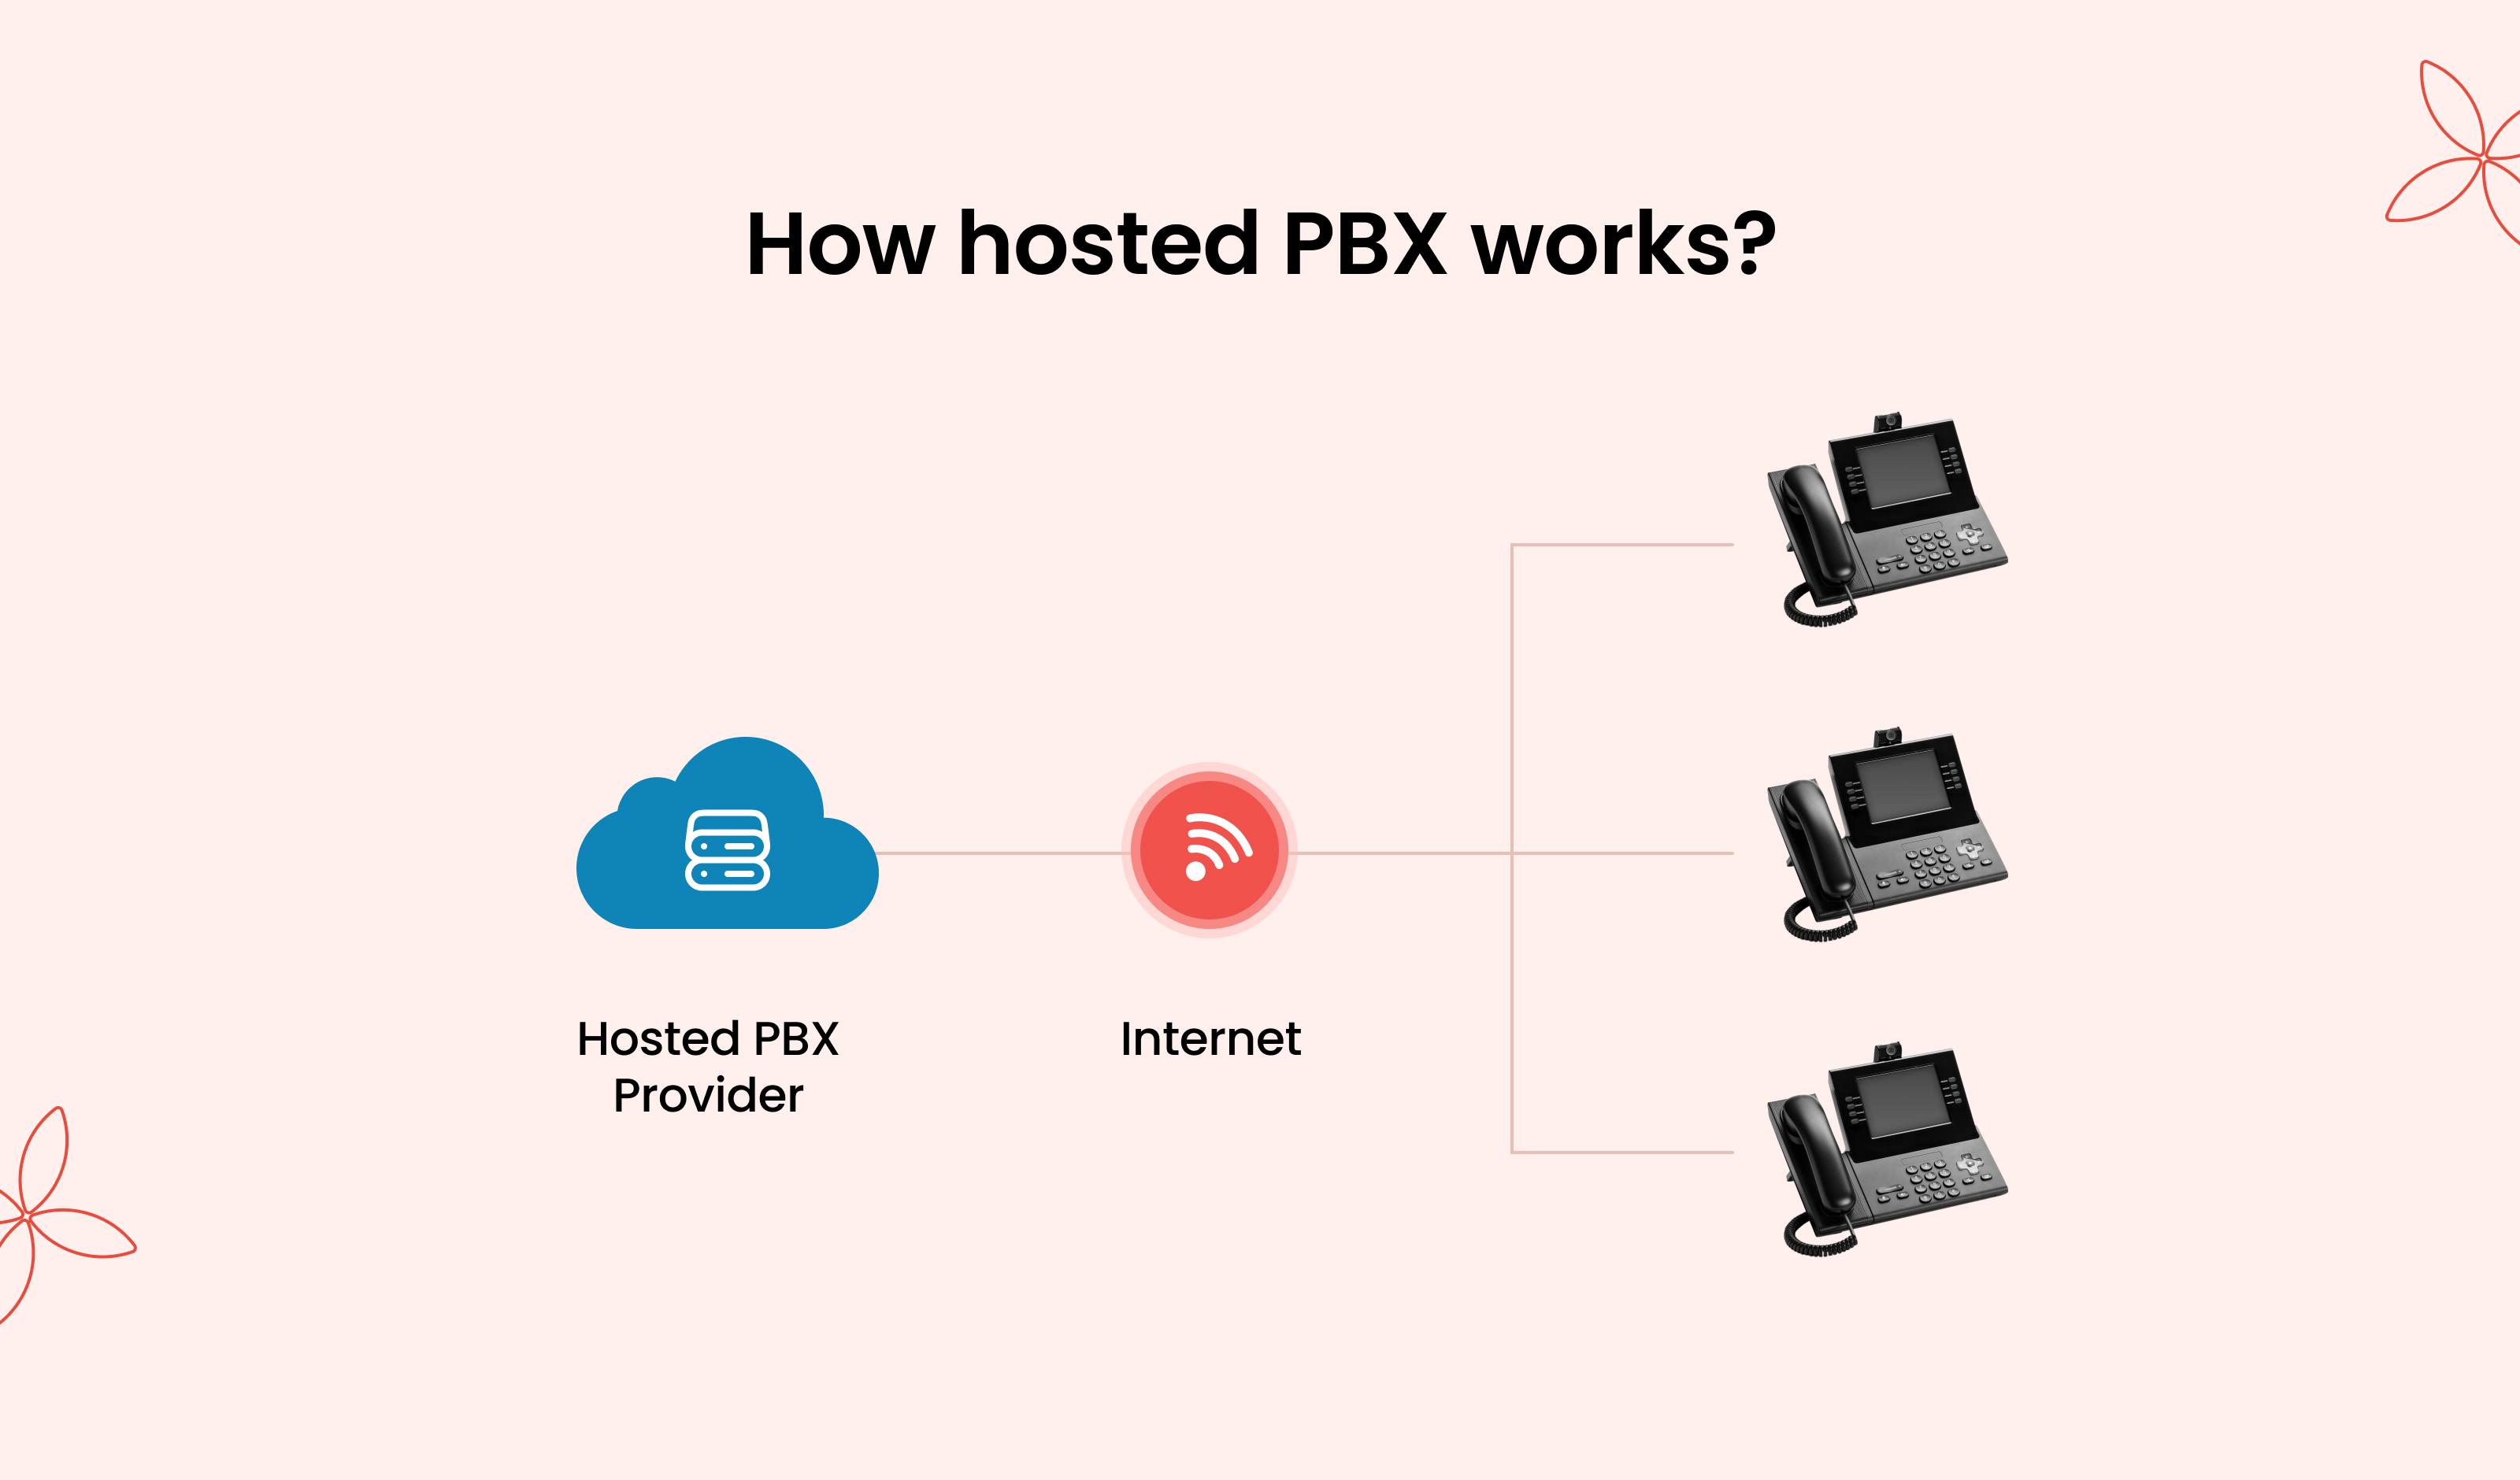 How Hosted PBX Works: